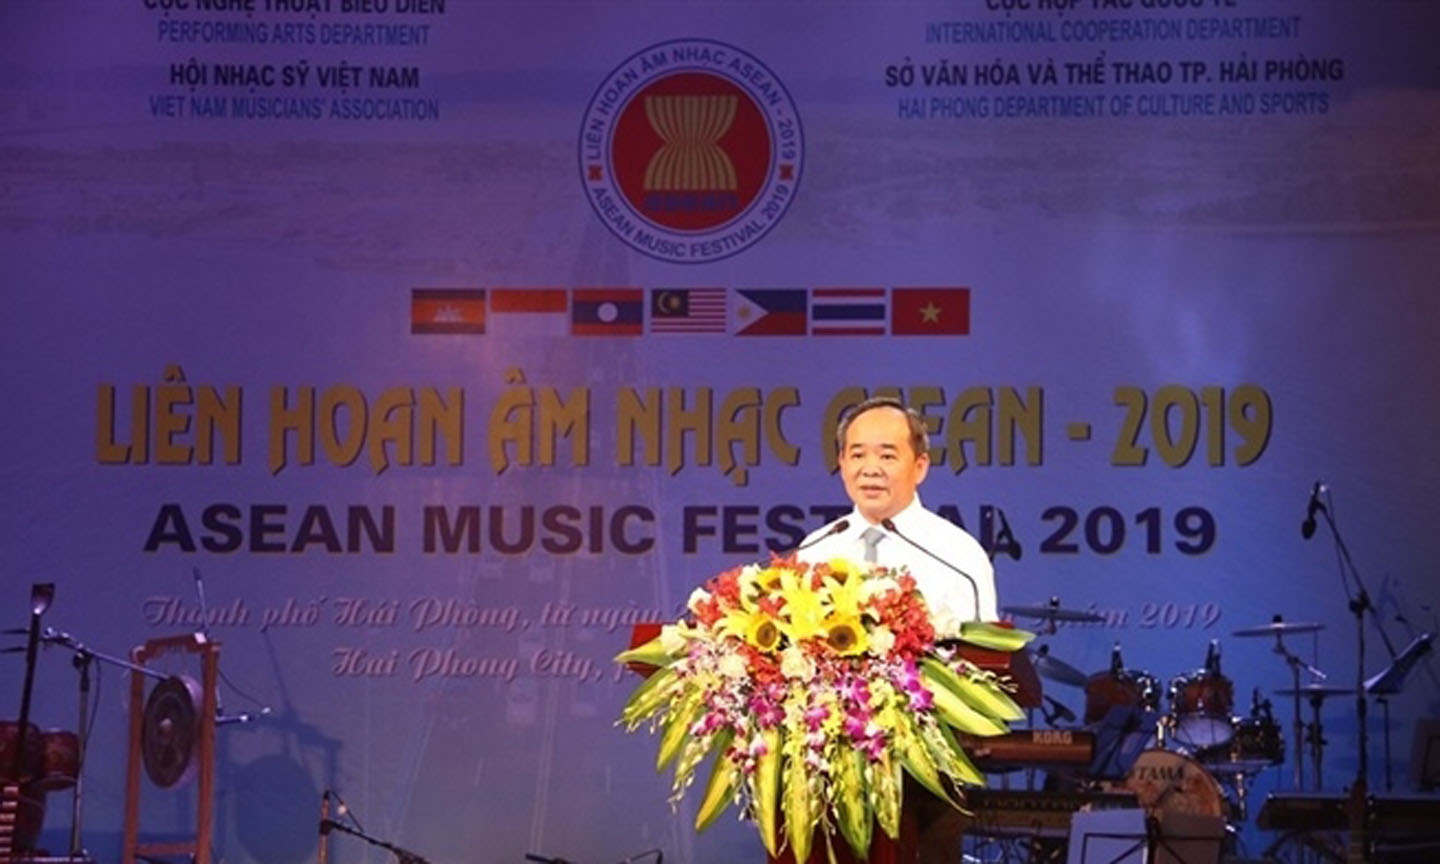 Deputy Minister of Culture, Sports and Tourism Le Khanh Hai speaking at the opening ceremony. (Photo: baovanhoa.vn)